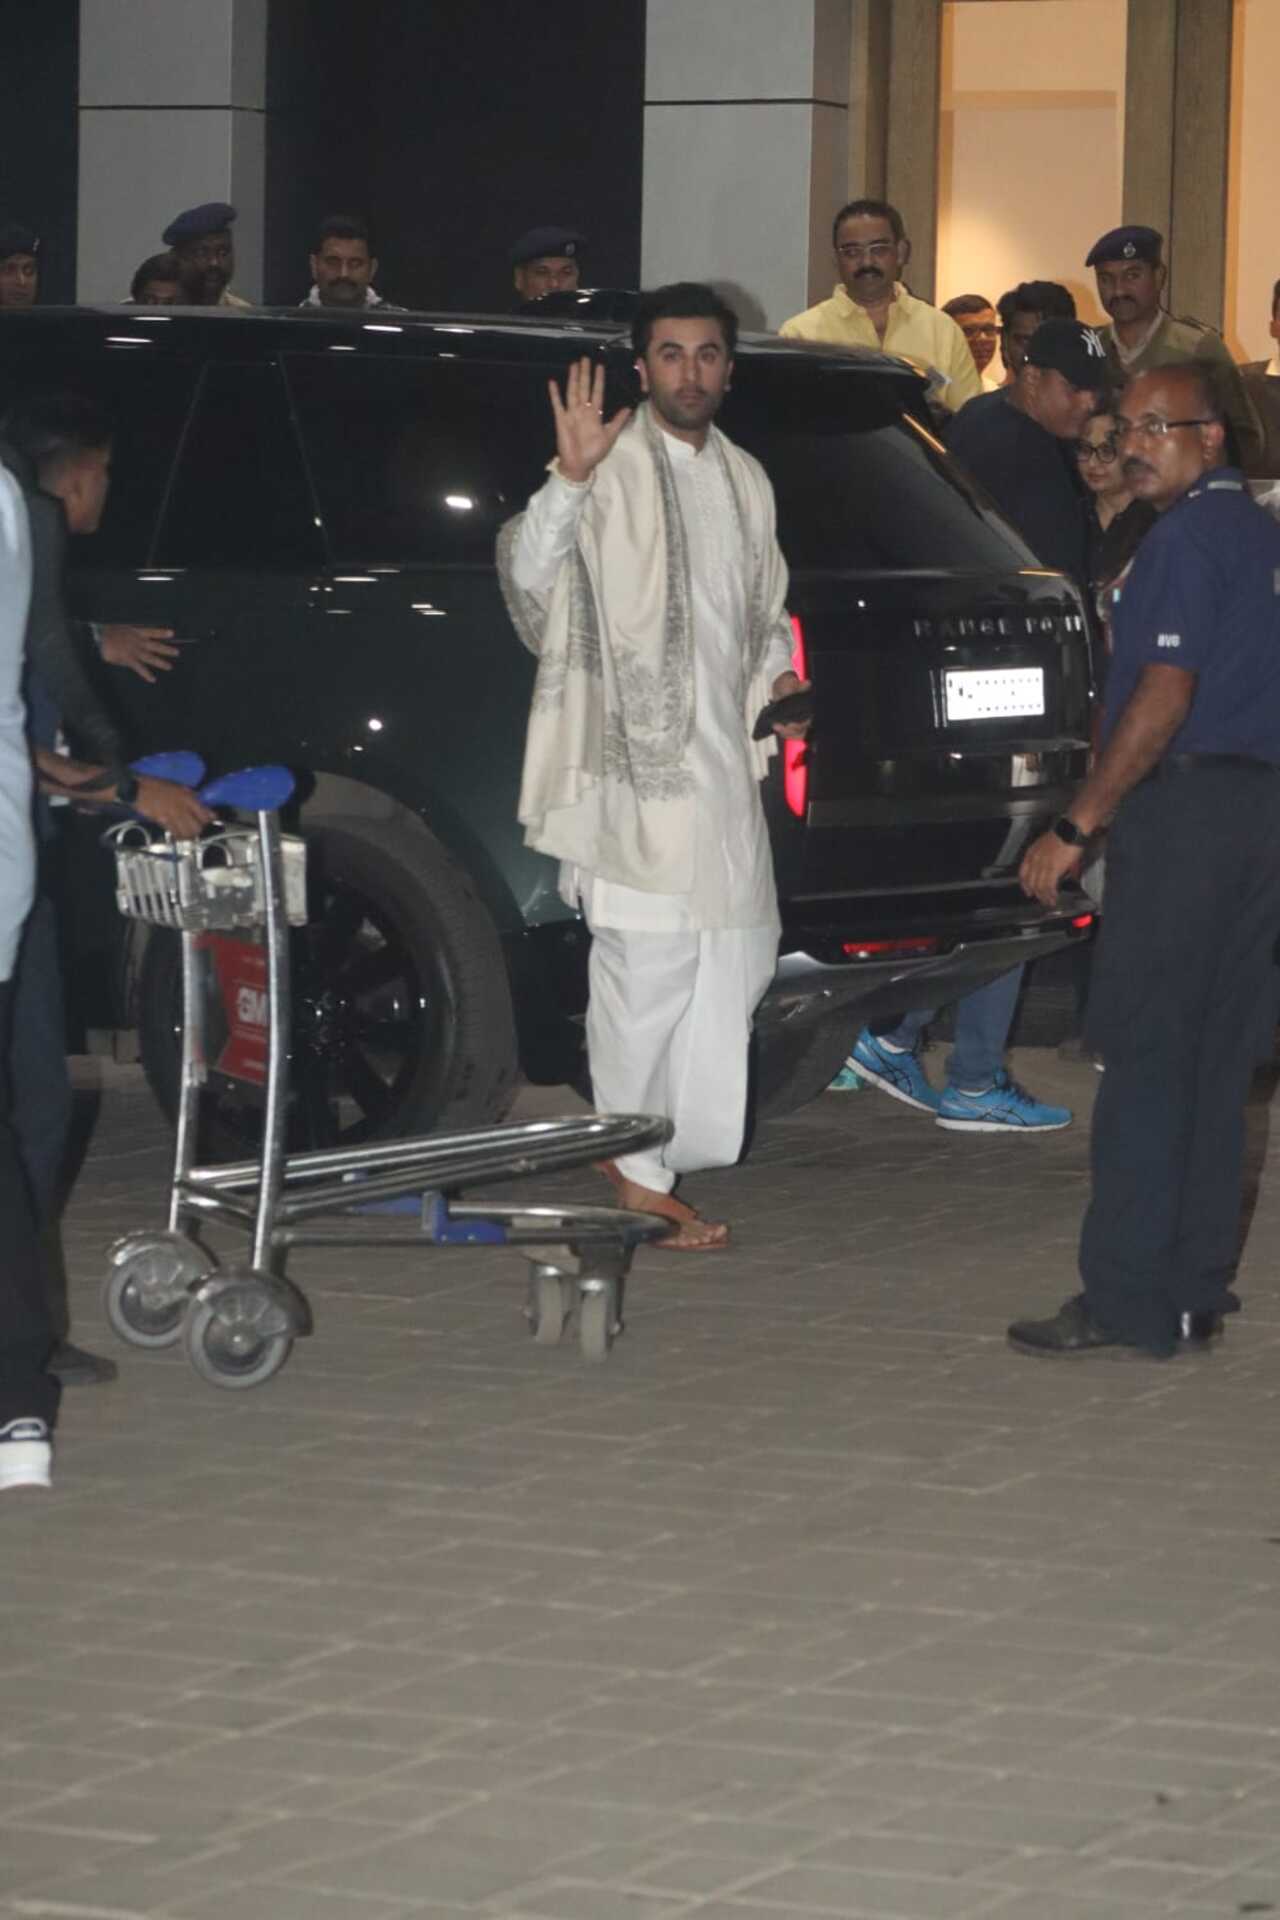 Actor Ranbir Kapoor looked smart in a proper kurta pajama set with an elaborate shawl. The actor is also gearing up to play the role of Lord Ram in an upcoming film based on the Ramayan-directed by Nitesh Tiwari 